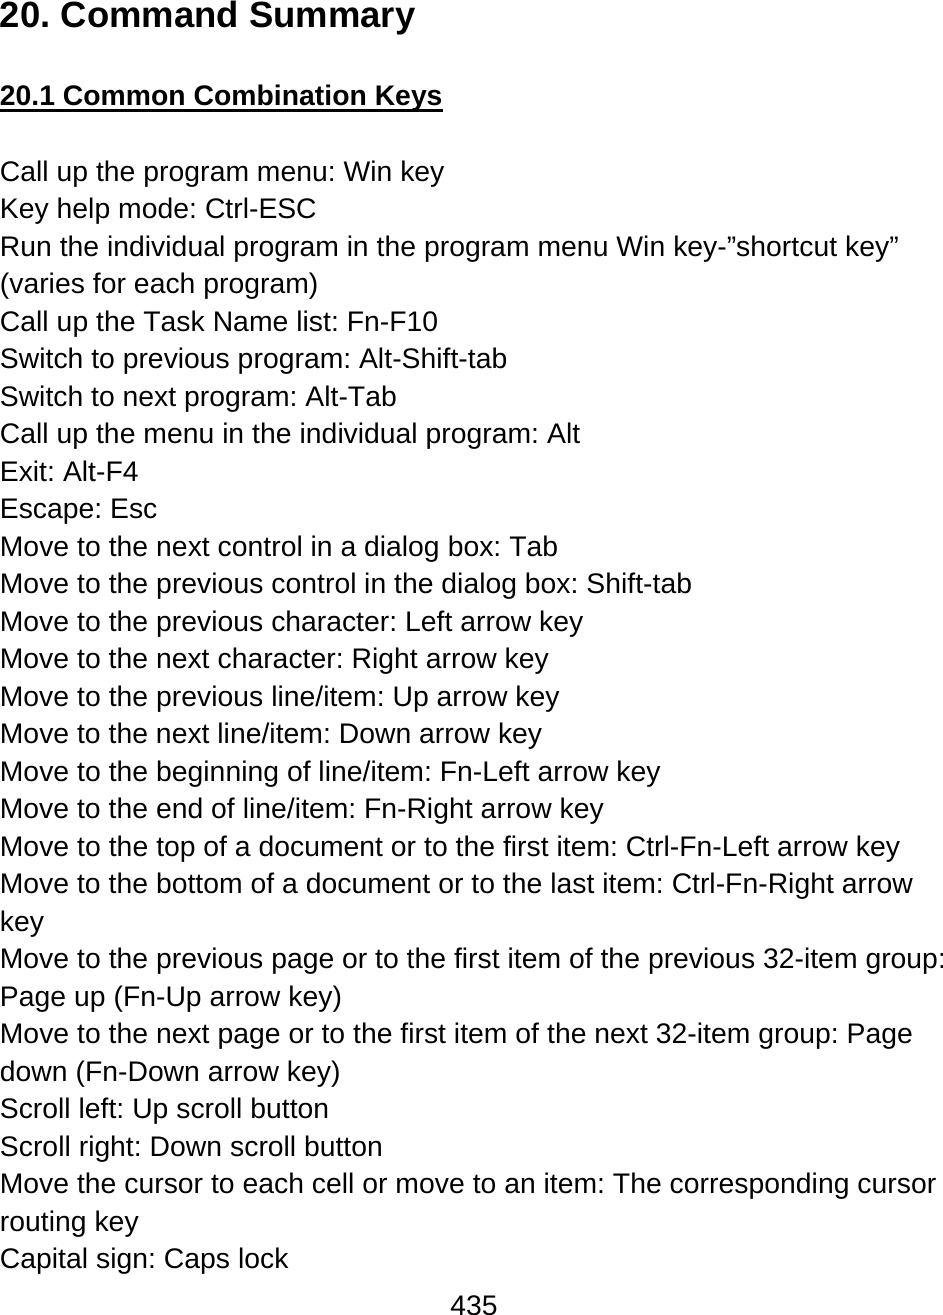 435  20. Command Summary  20.1 Common Combination Keys  Call up the program menu: Win key Key help mode: Ctrl-ESC Run the individual program in the program menu Win key-”shortcut key” (varies for each program) Call up the Task Name list: Fn-F10 Switch to previous program: Alt-Shift-tab Switch to next program: Alt-Tab Call up the menu in the individual program: Alt Exit: Alt-F4 Escape: Esc Move to the next control in a dialog box: Tab Move to the previous control in the dialog box: Shift-tab Move to the previous character: Left arrow key Move to the next character: Right arrow key Move to the previous line/item: Up arrow key Move to the next line/item: Down arrow key Move to the beginning of line/item: Fn-Left arrow key Move to the end of line/item: Fn-Right arrow key Move to the top of a document or to the first item: Ctrl-Fn-Left arrow key Move to the bottom of a document or to the last item: Ctrl-Fn-Right arrow key Move to the previous page or to the first item of the previous 32-item group: Page up (Fn-Up arrow key) Move to the next page or to the first item of the next 32-item group: Page down (Fn-Down arrow key) Scroll left: Up scroll button Scroll right: Down scroll button Move the cursor to each cell or move to an item: The corresponding cursor routing key Capital sign: Caps lock 